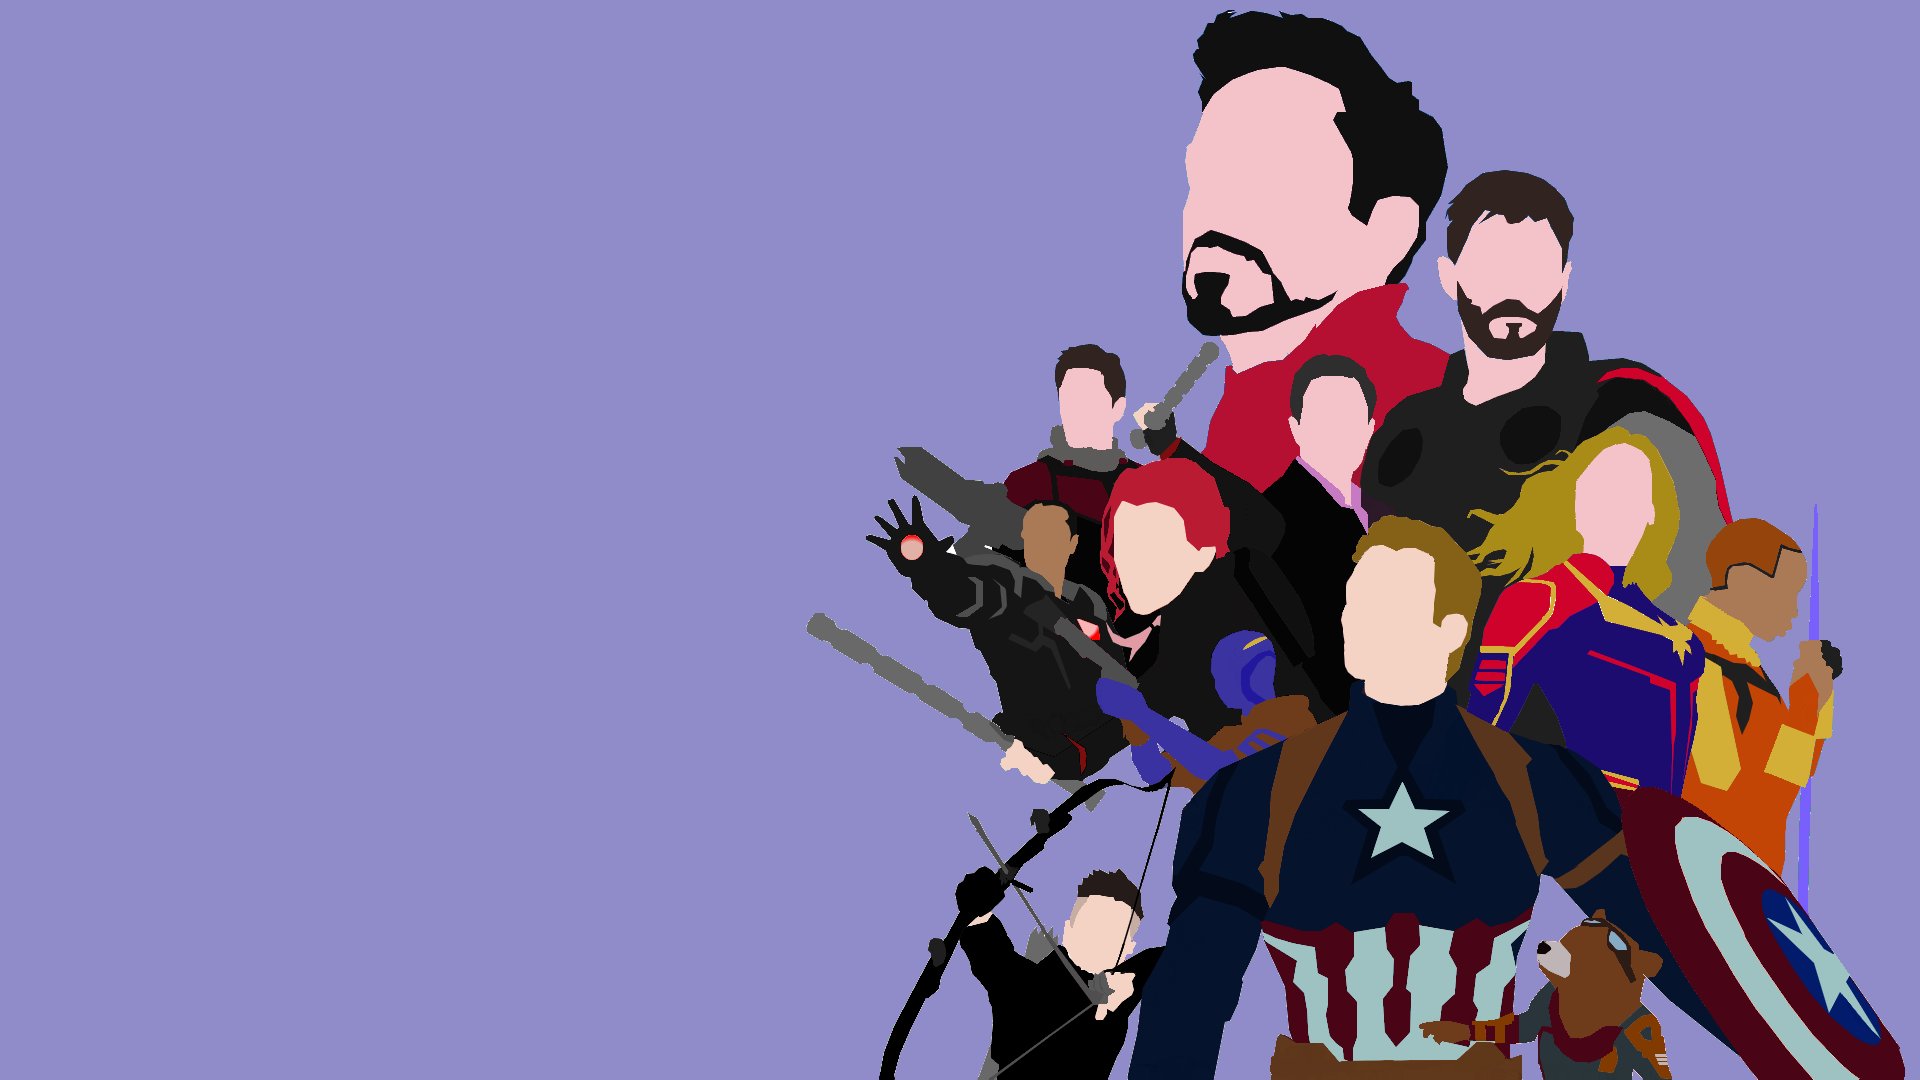 Avengers Endgame Picture by b10